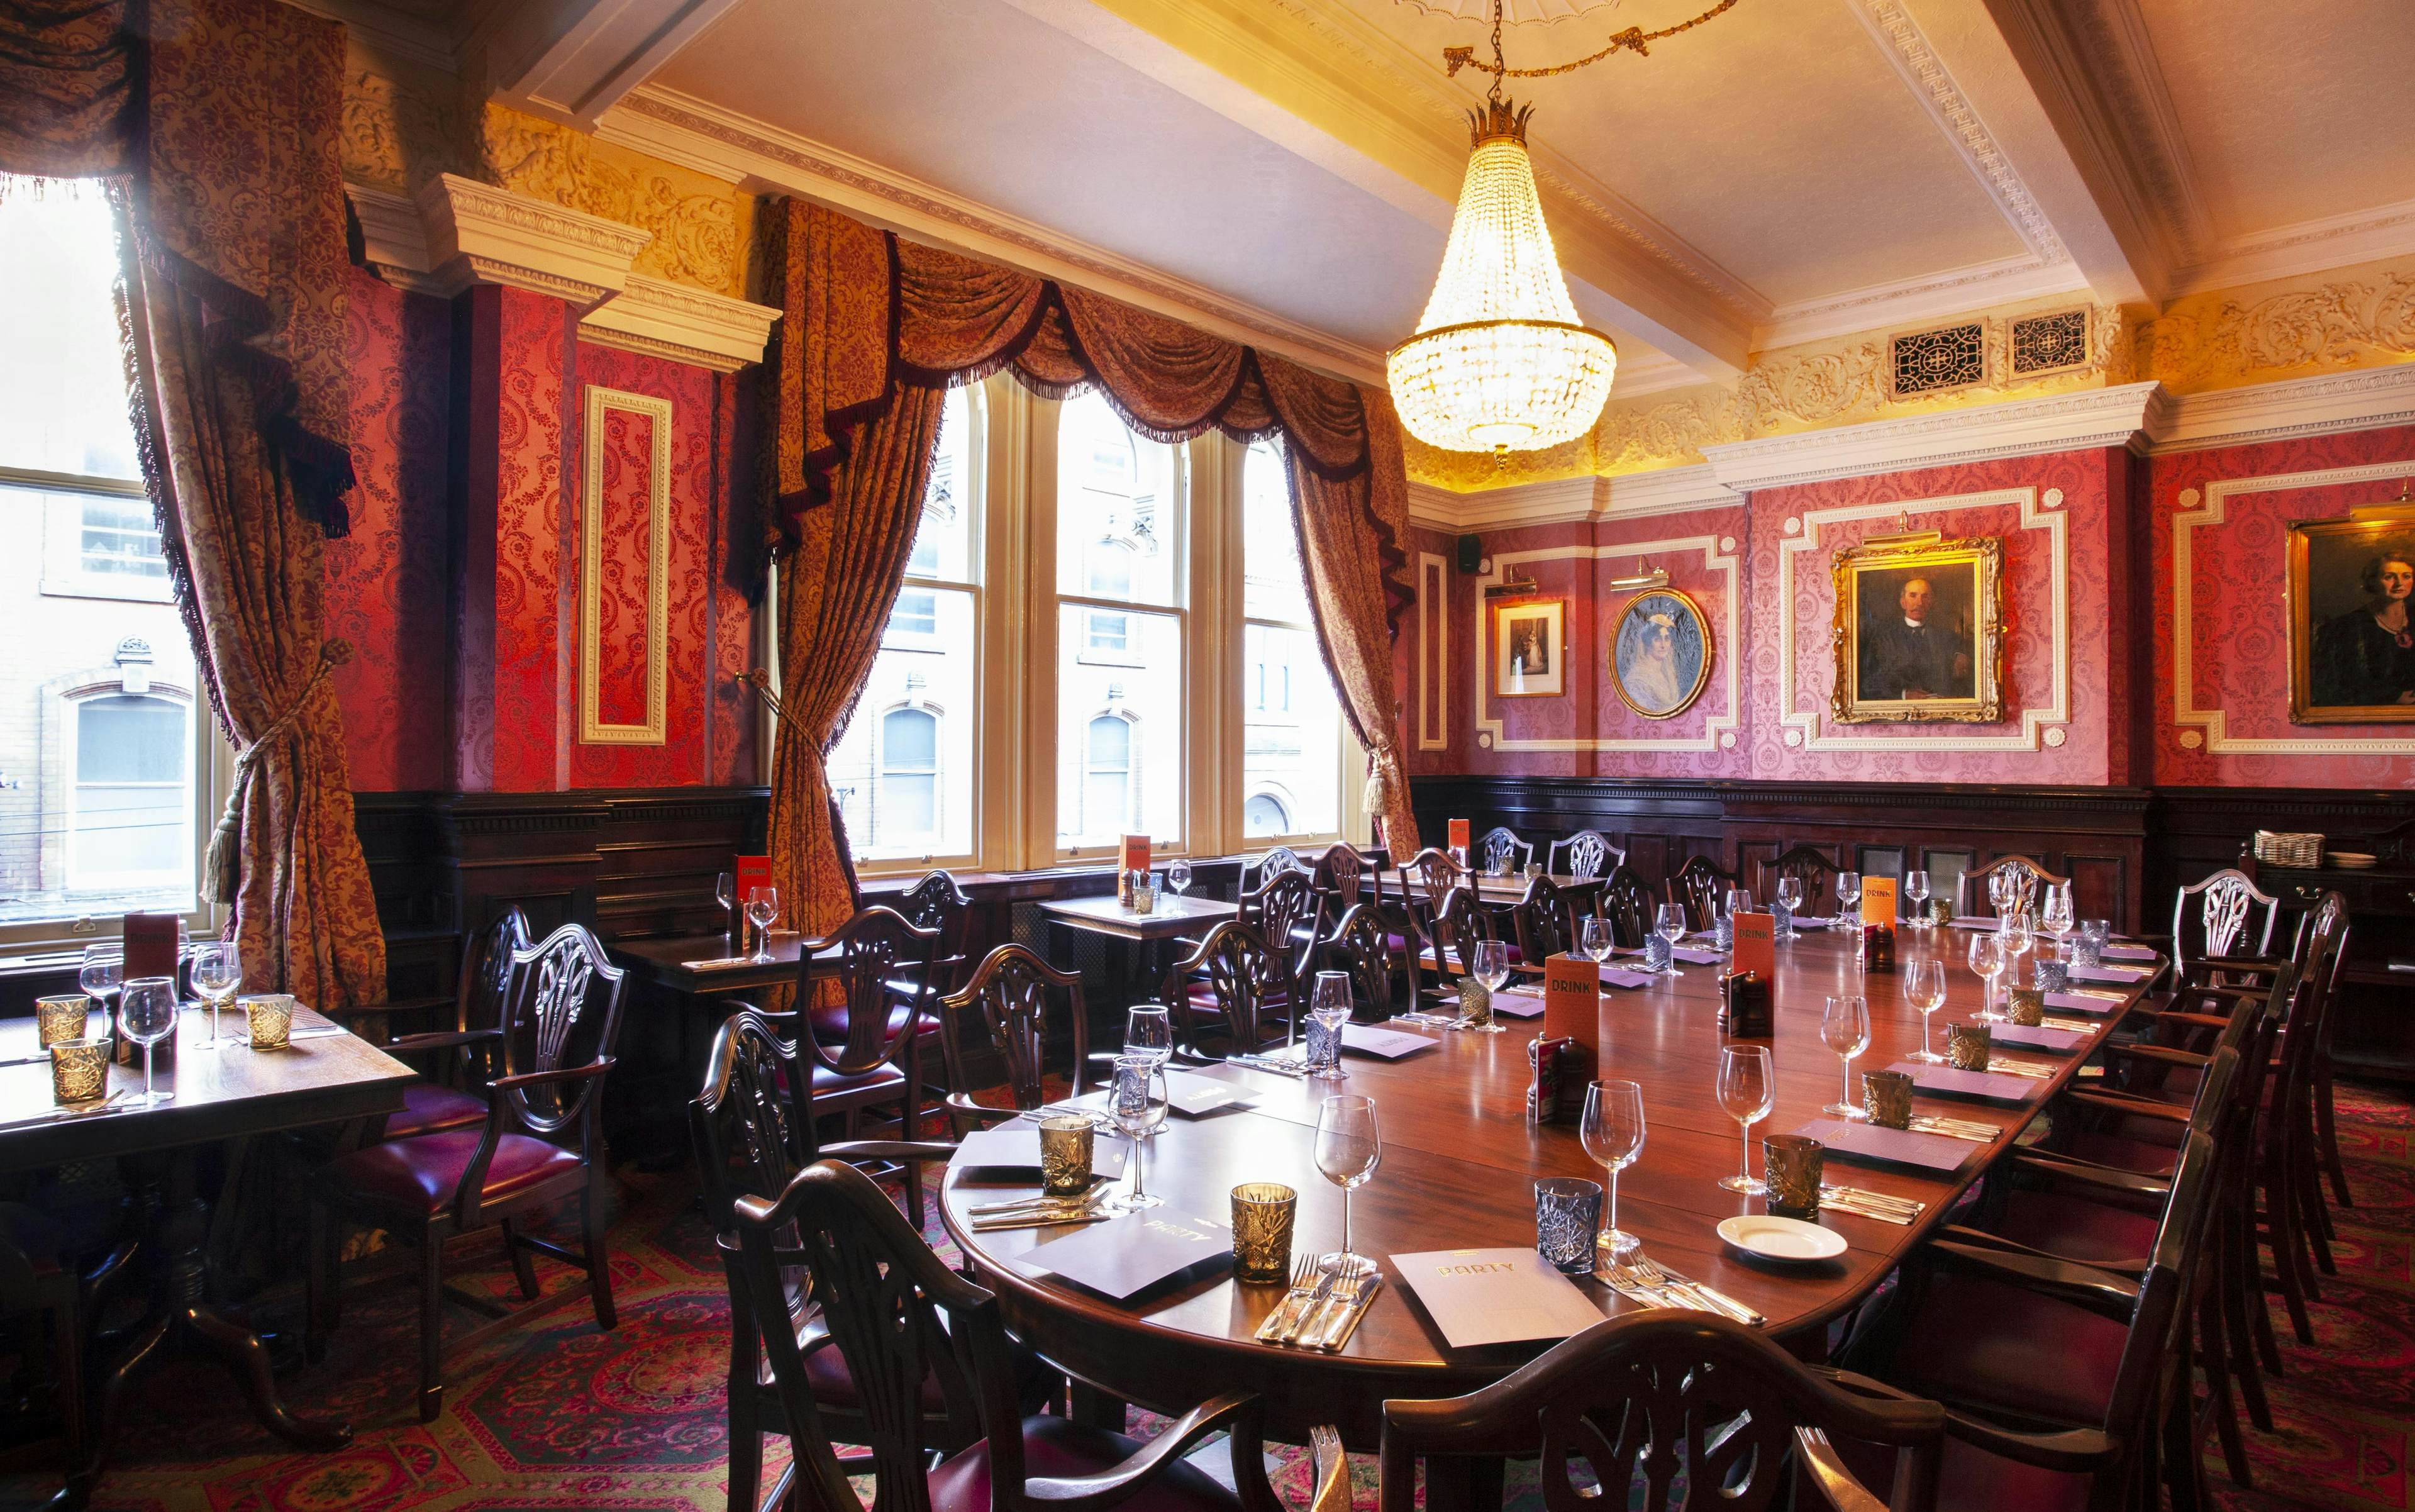 Cosy Club Nottingham - The Victorian Lounge image 1